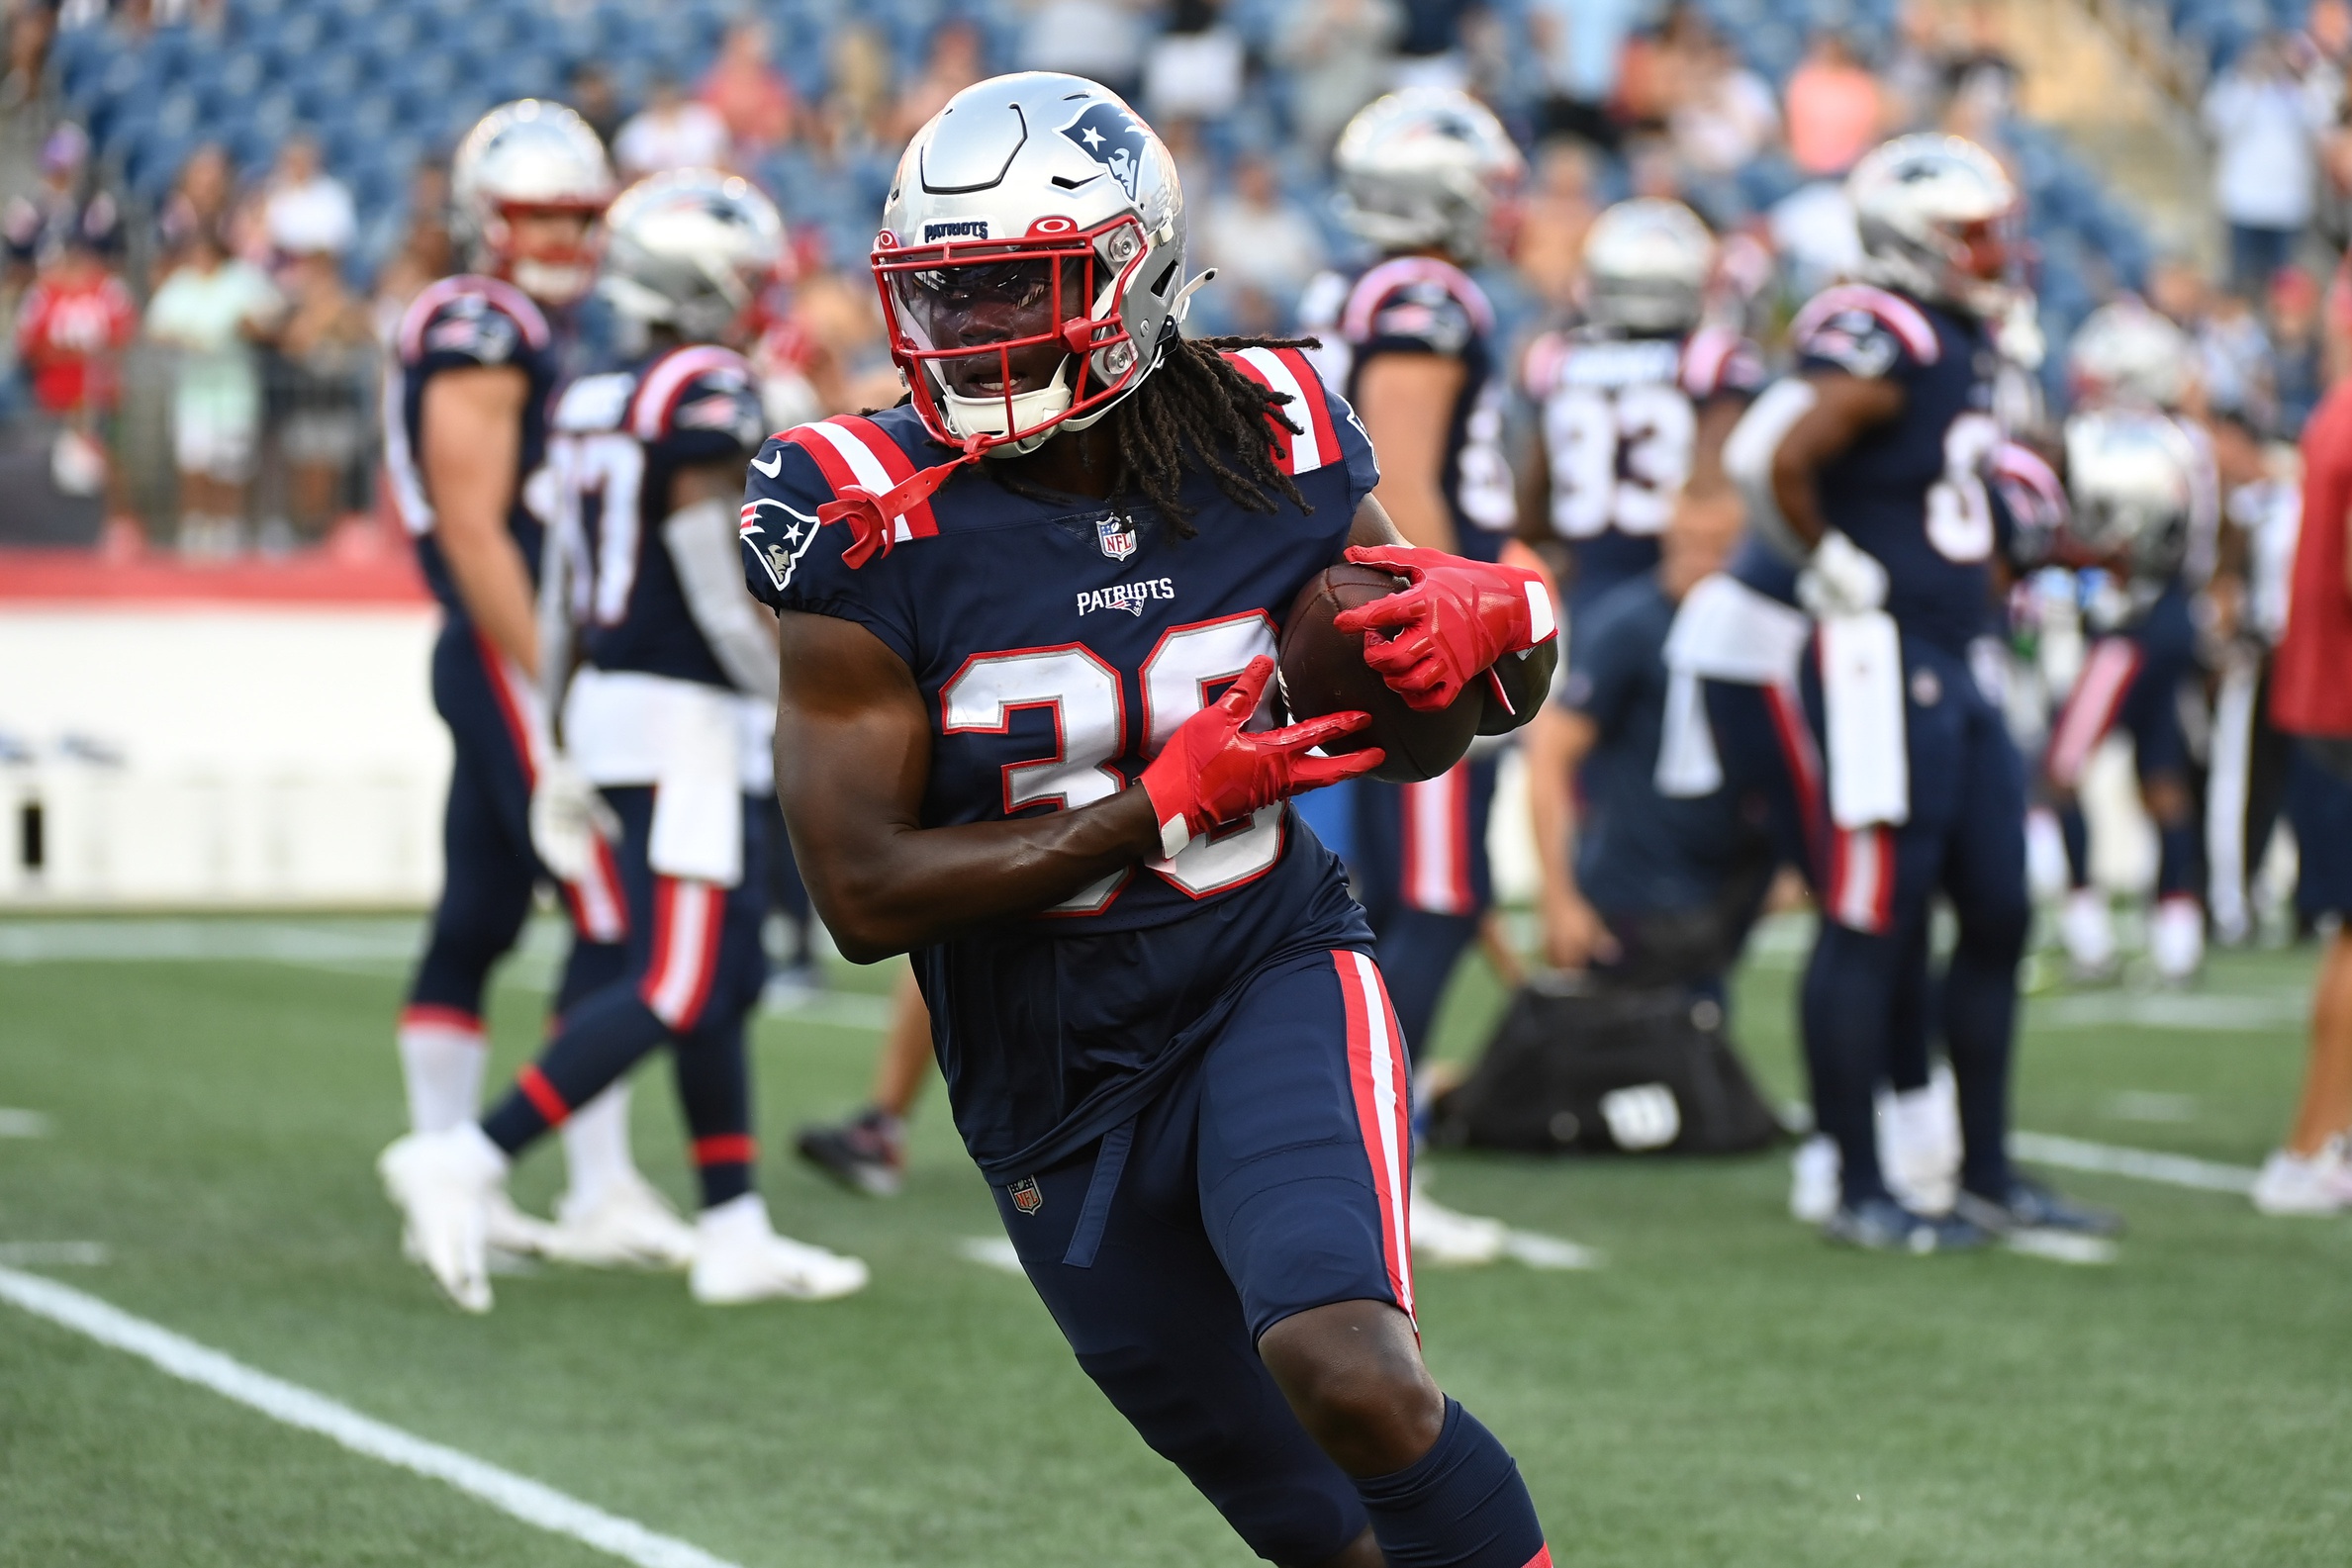 Top Dolphins vs. Patriots DFS DraftKings lineup includes Rhamondre